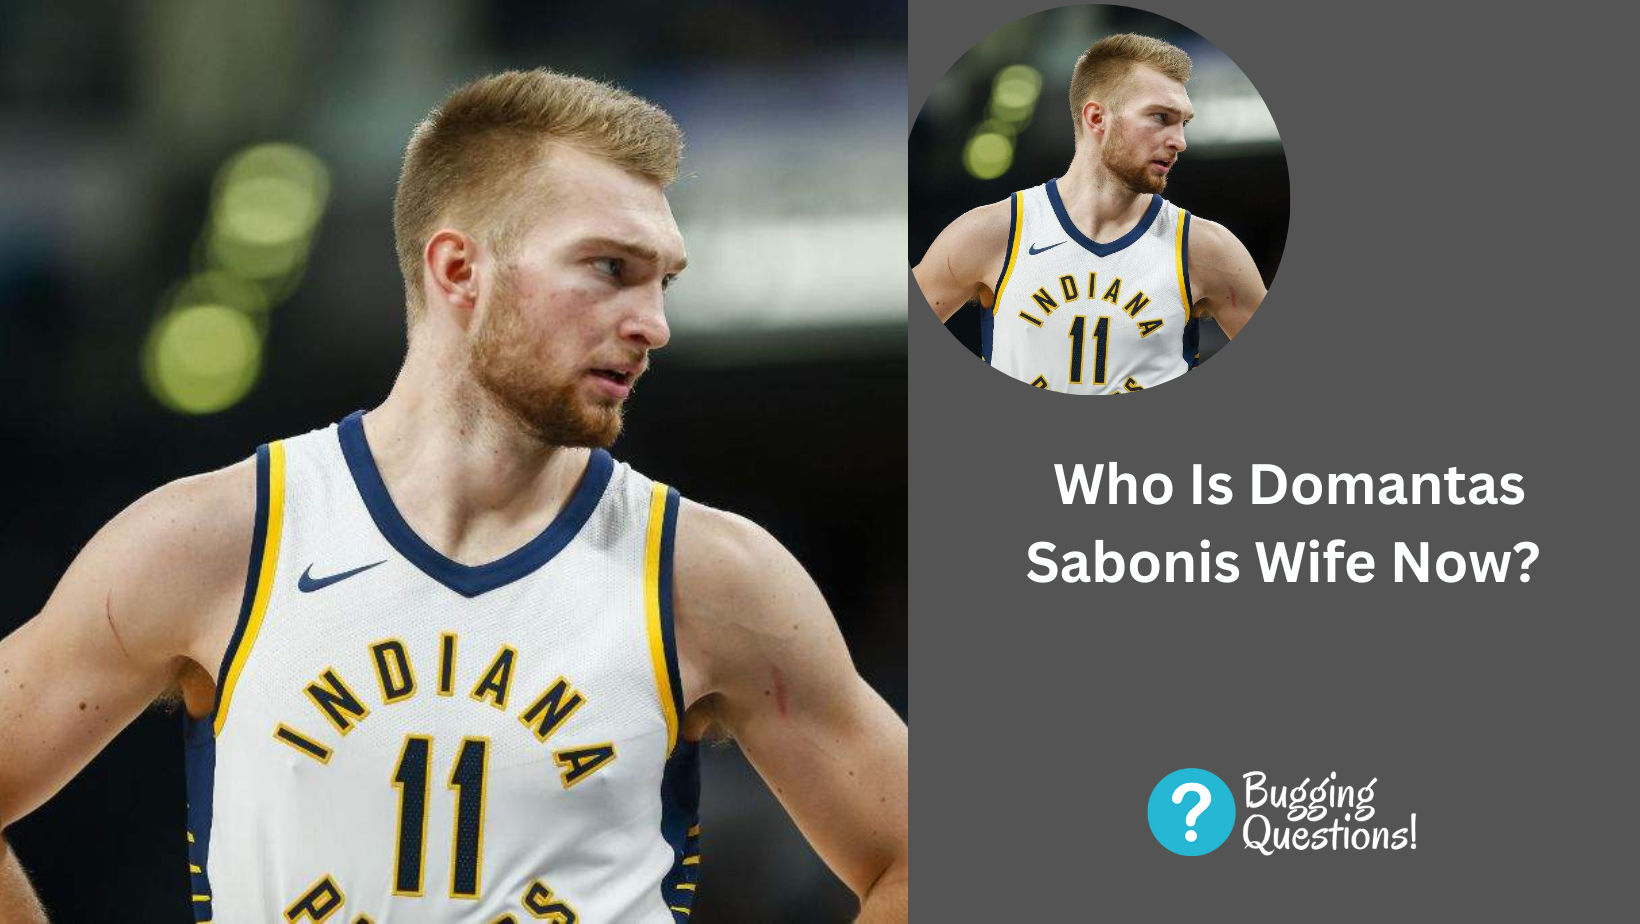 Who Is Domantas Sabonis Wife Now?